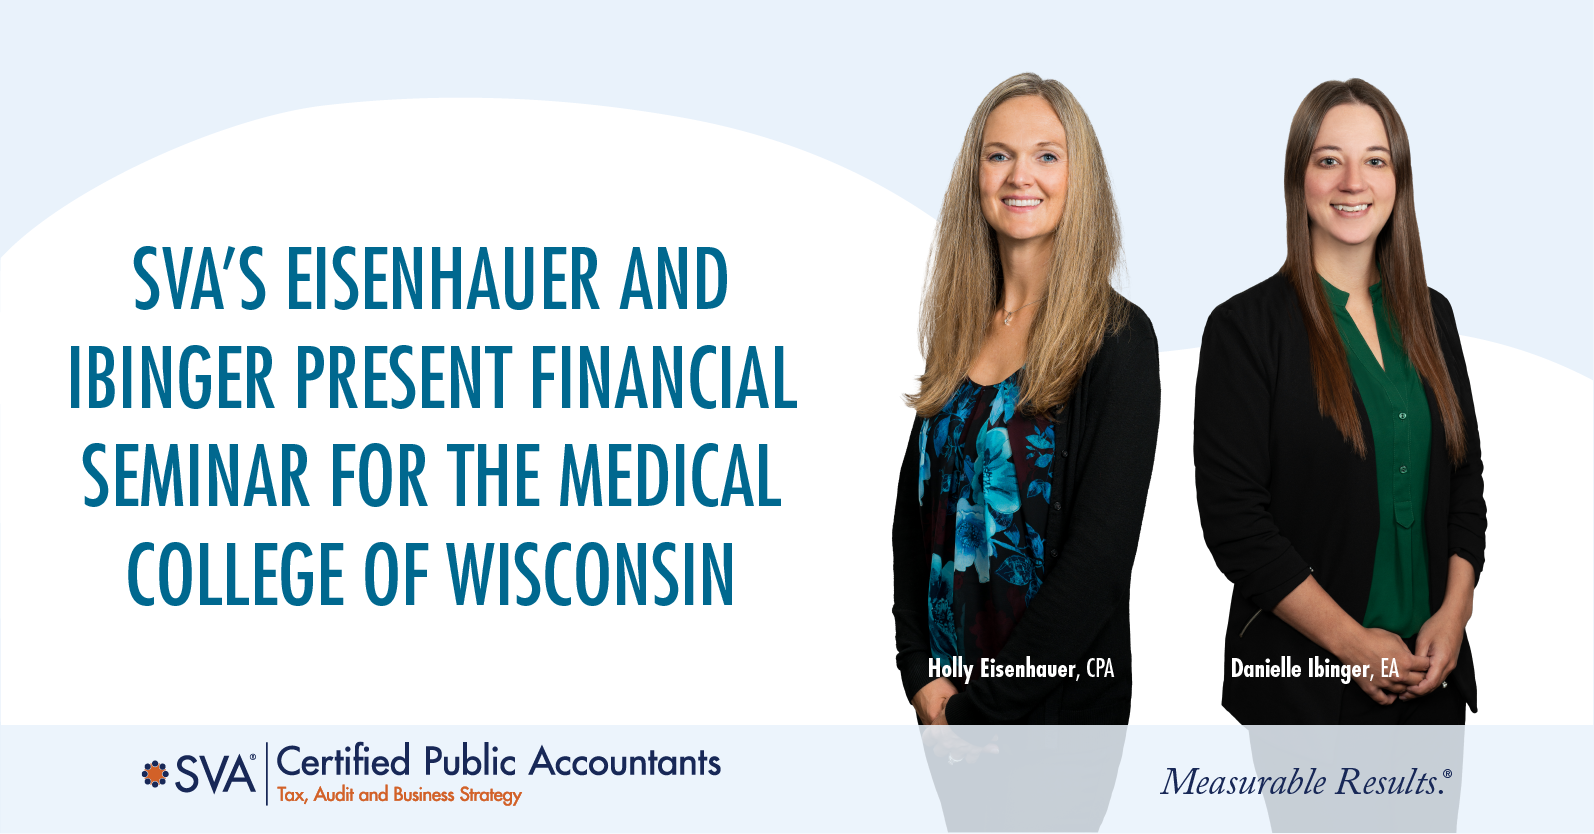 SVA’s Eisenhauer and Ibinger Present Financial Seminar for the Medical College of Wisconsin 